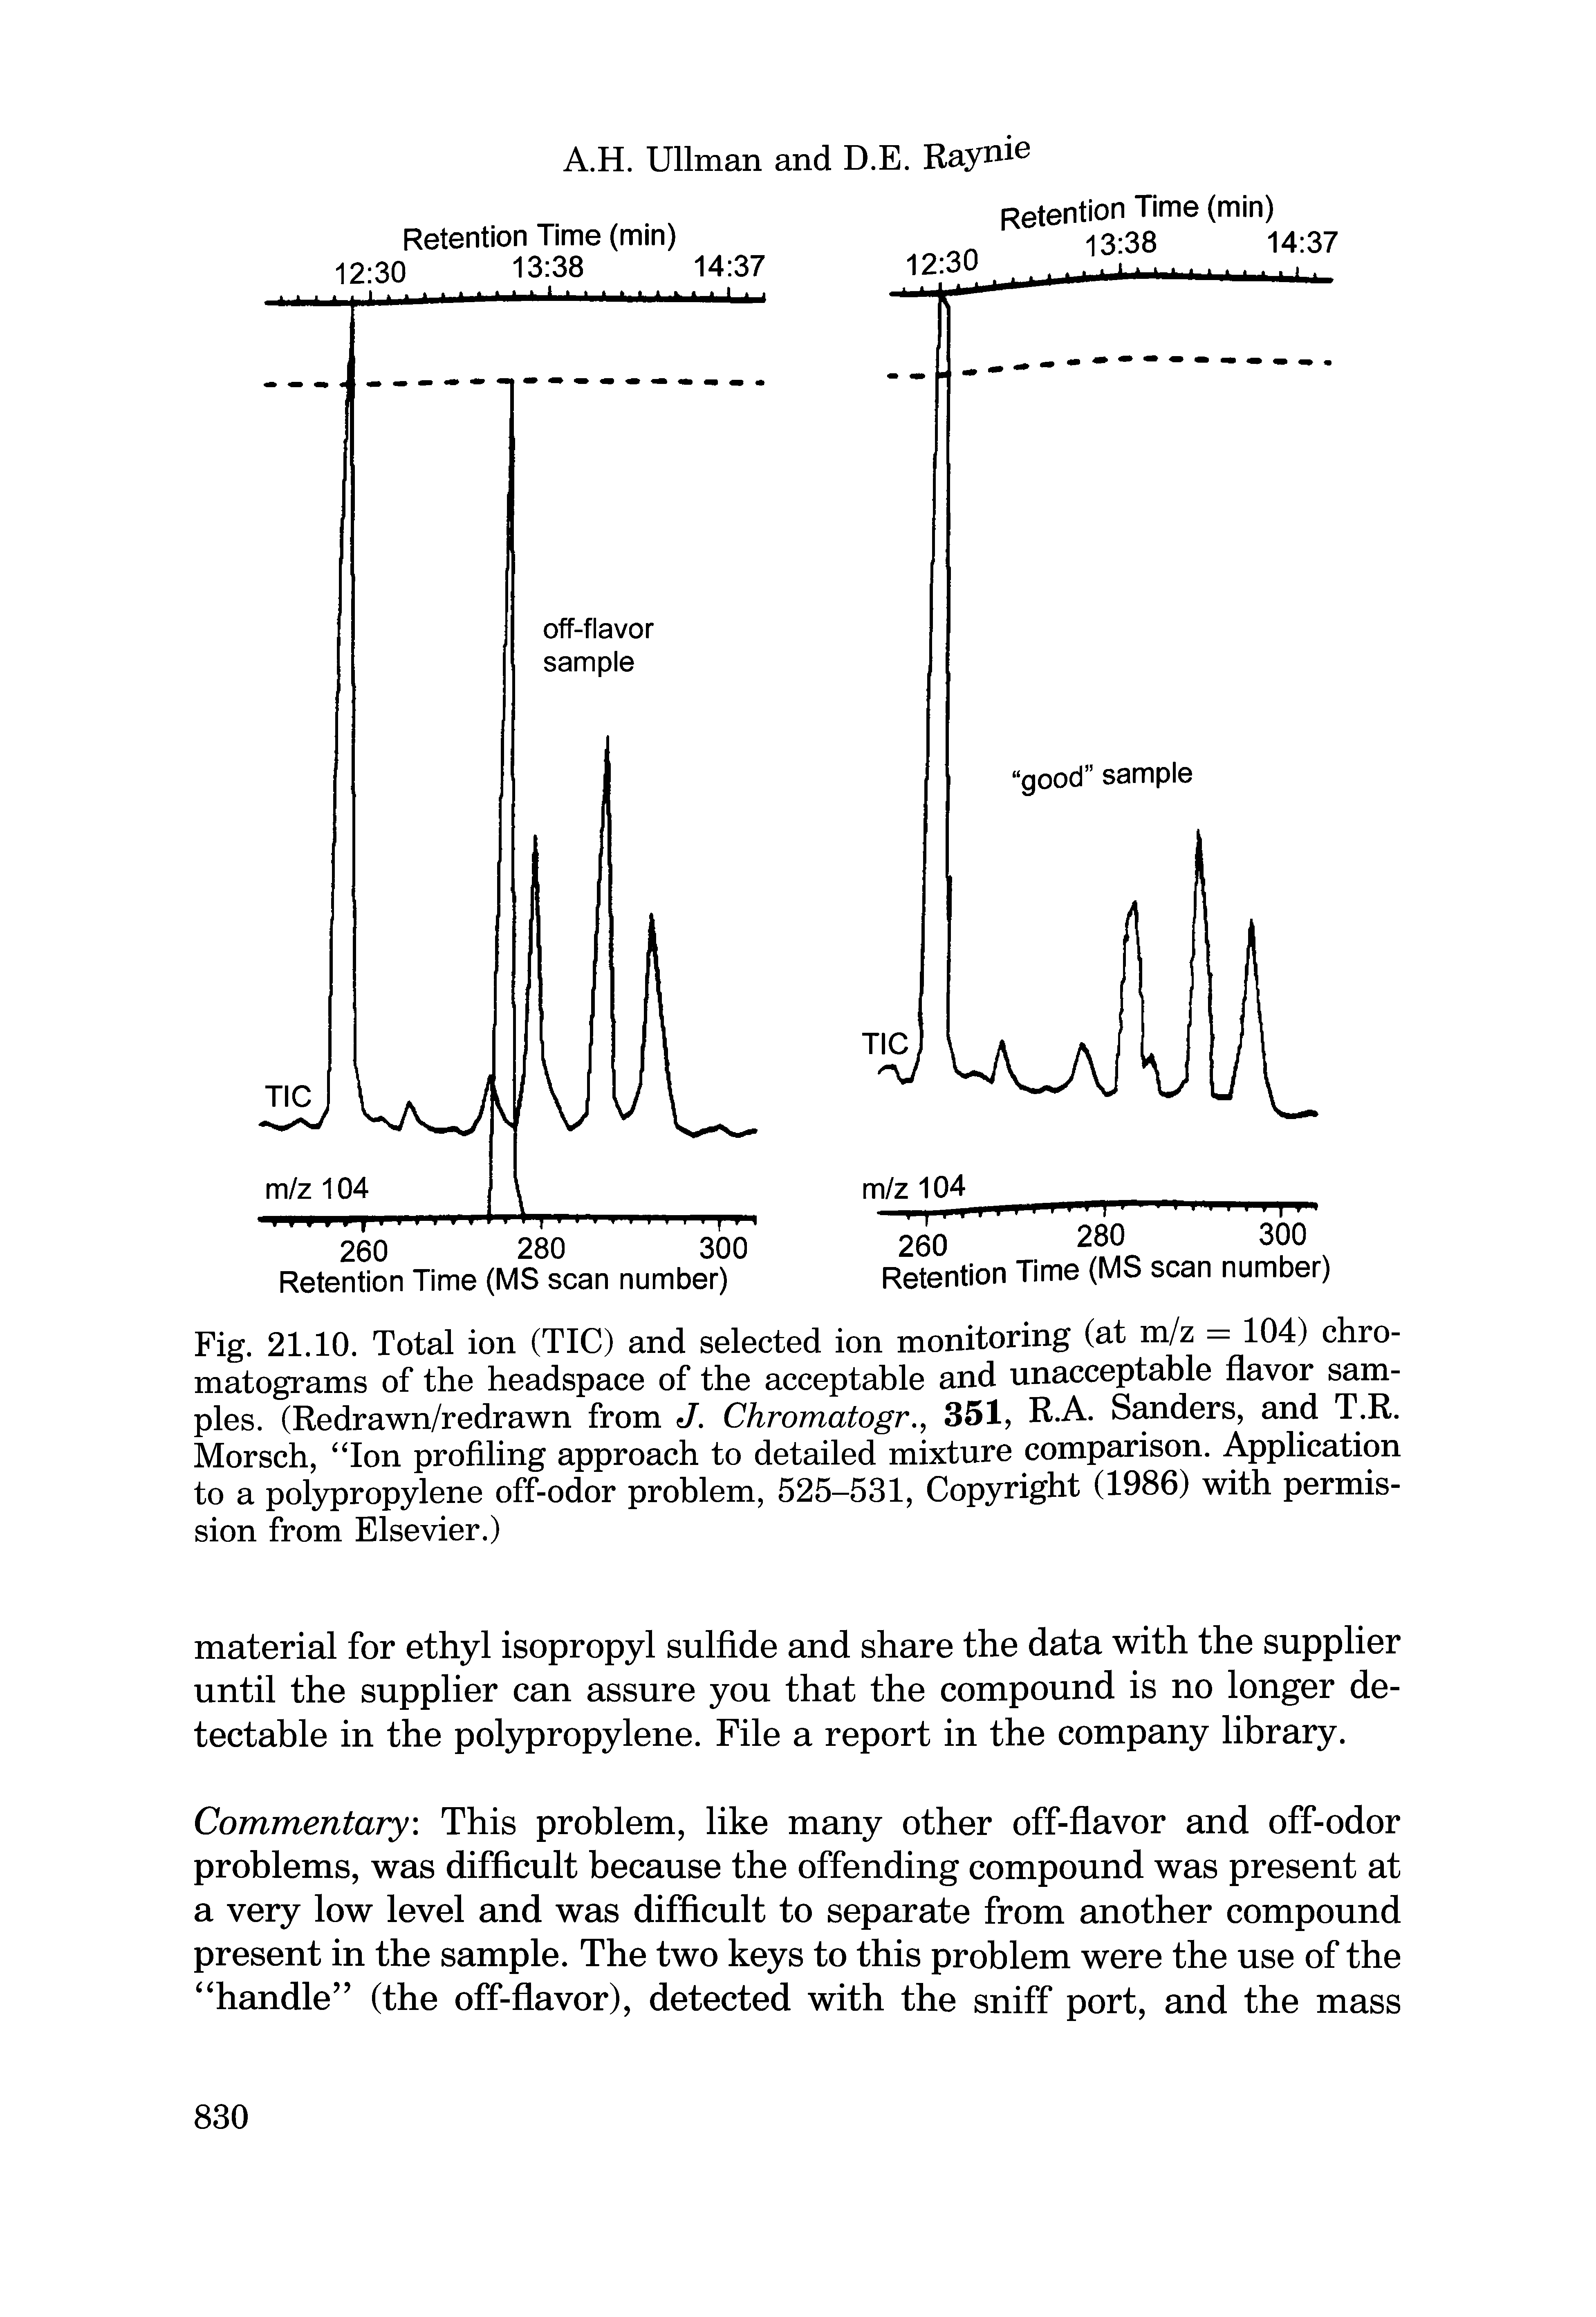 Fig. 21.10. Total ion (TIC) and selected ion monitoring (at m/z = 104) chromatograms of the headspace of the acceptable and unacceptable flavor samples. (Redrawn/redrawn from J. Chromatogr., 351, R.A. Sanders, and T.R. Morsch, Ion profiling approach to detailed mixture comparison. Application to a polypropylene off-odor problem, 525-531, Copyright (1986) with permission from Elsevier.)...